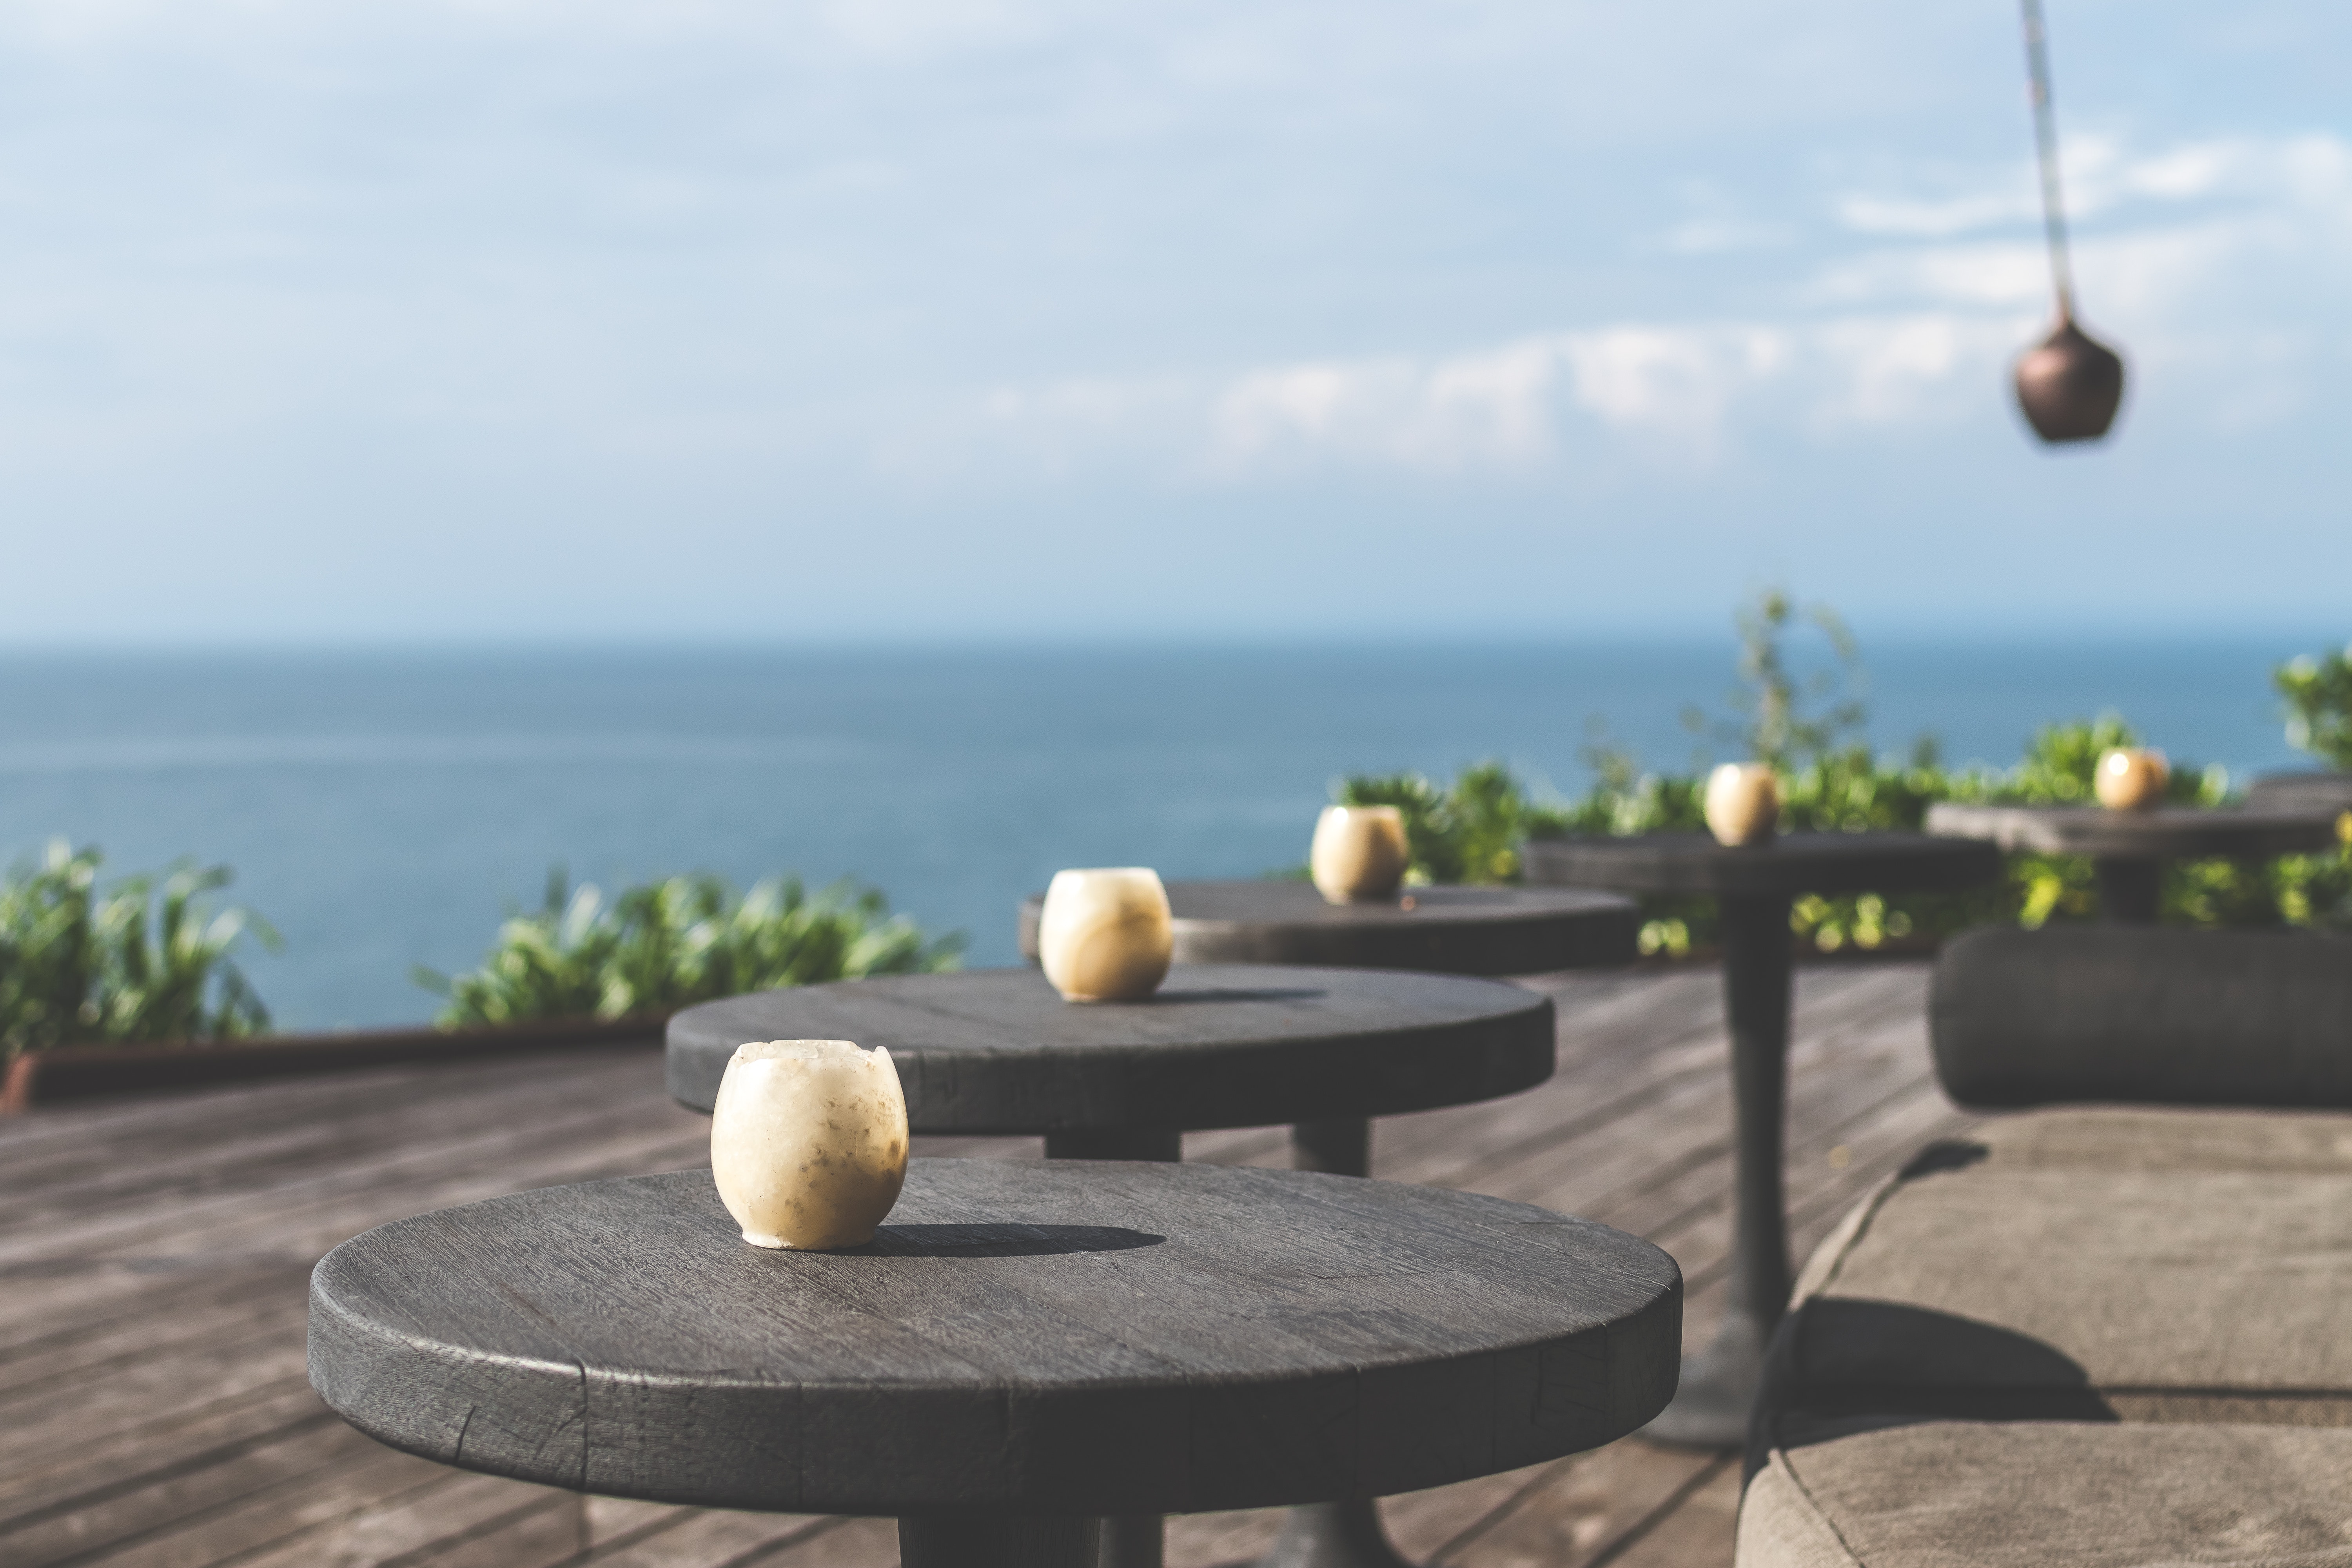 Tilt Lens Photography of Black Wooden Table, Beach, Setting, Recreation, Relaxation, HQ Photo